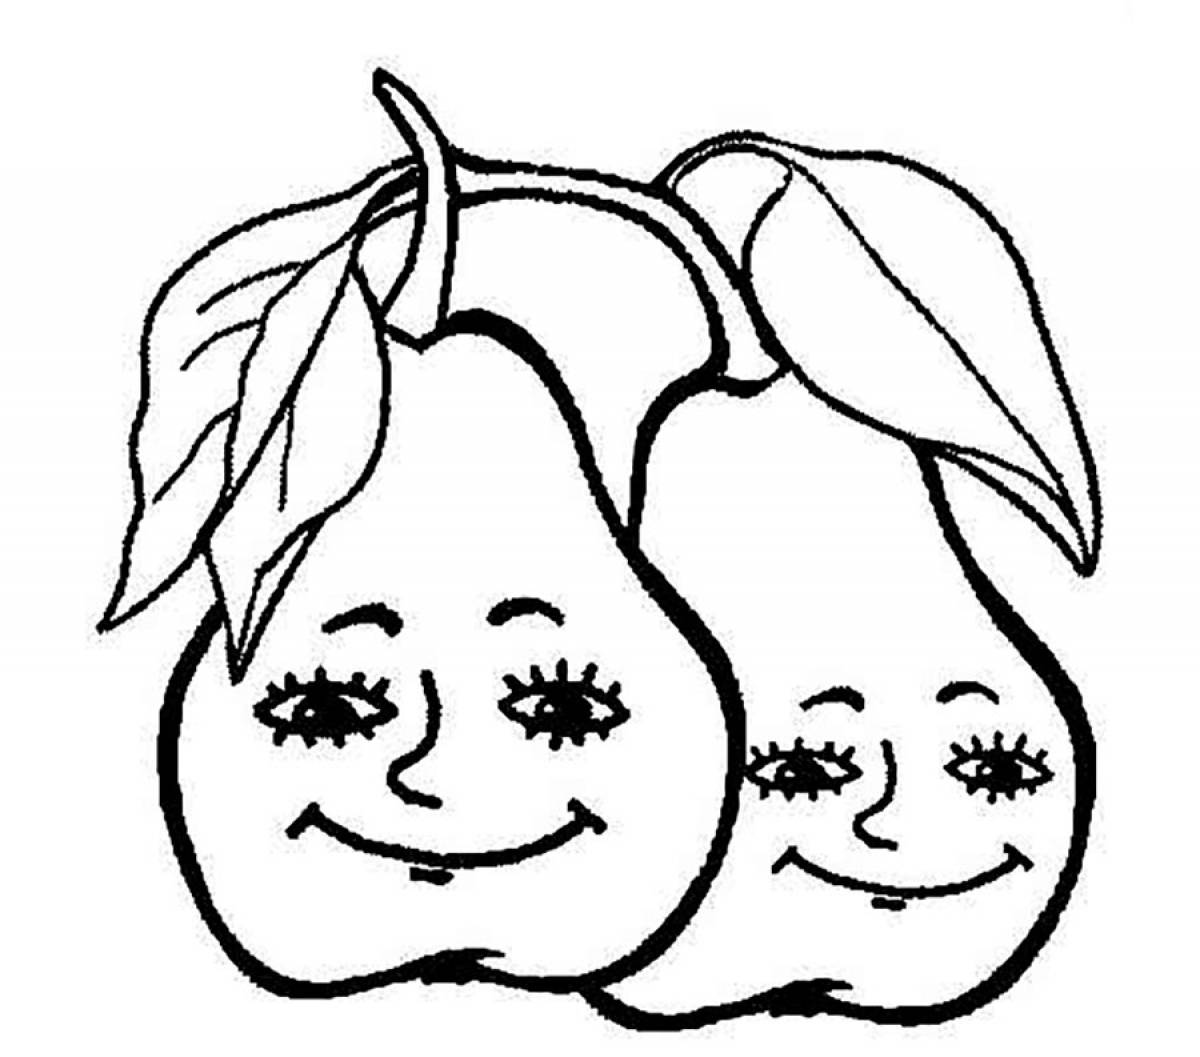 Pears with eyes